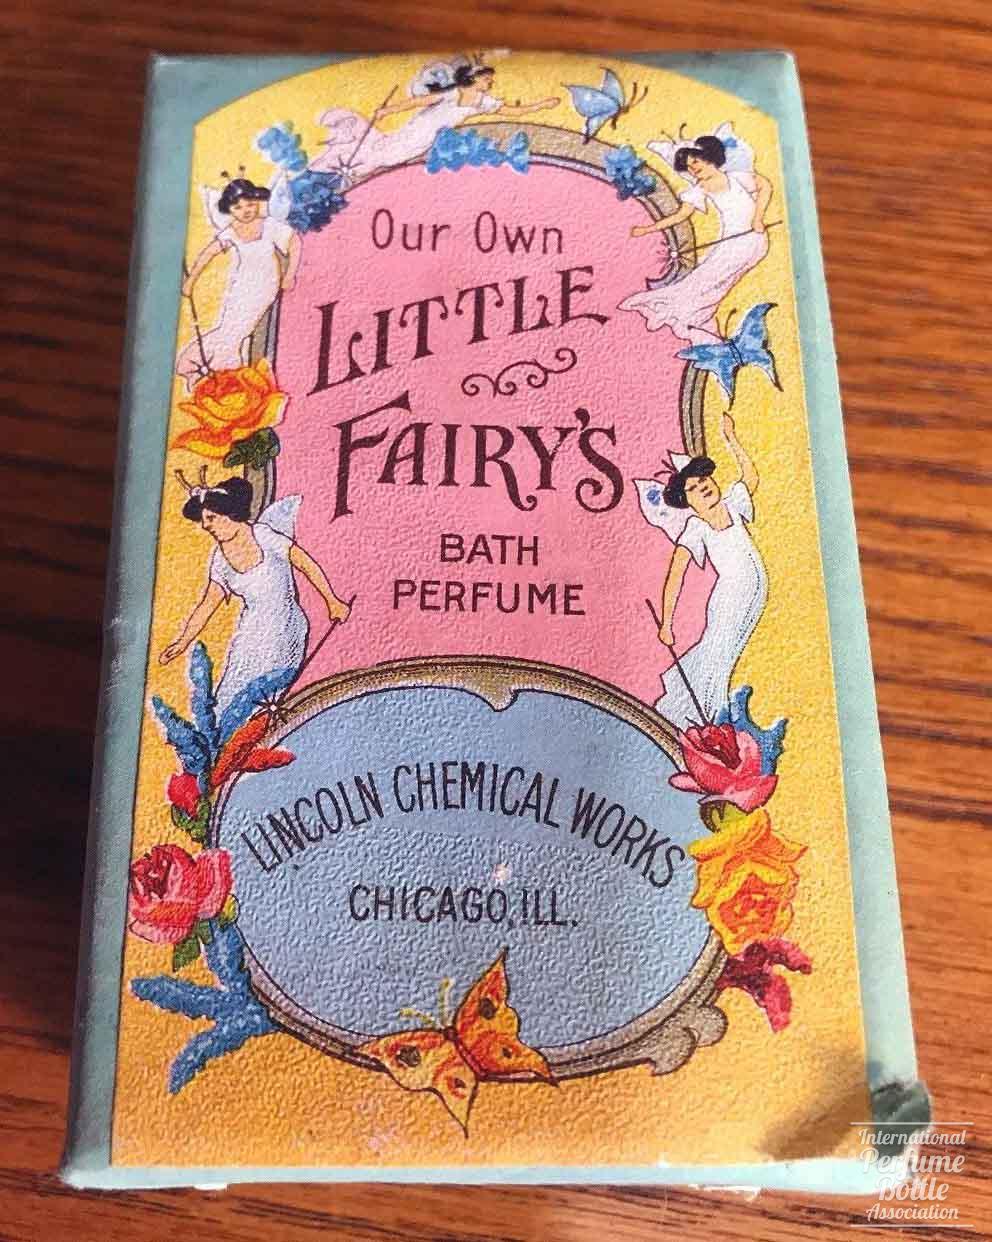 "Little Fairy's Bath Perfume" by Lincoln Chemical Works